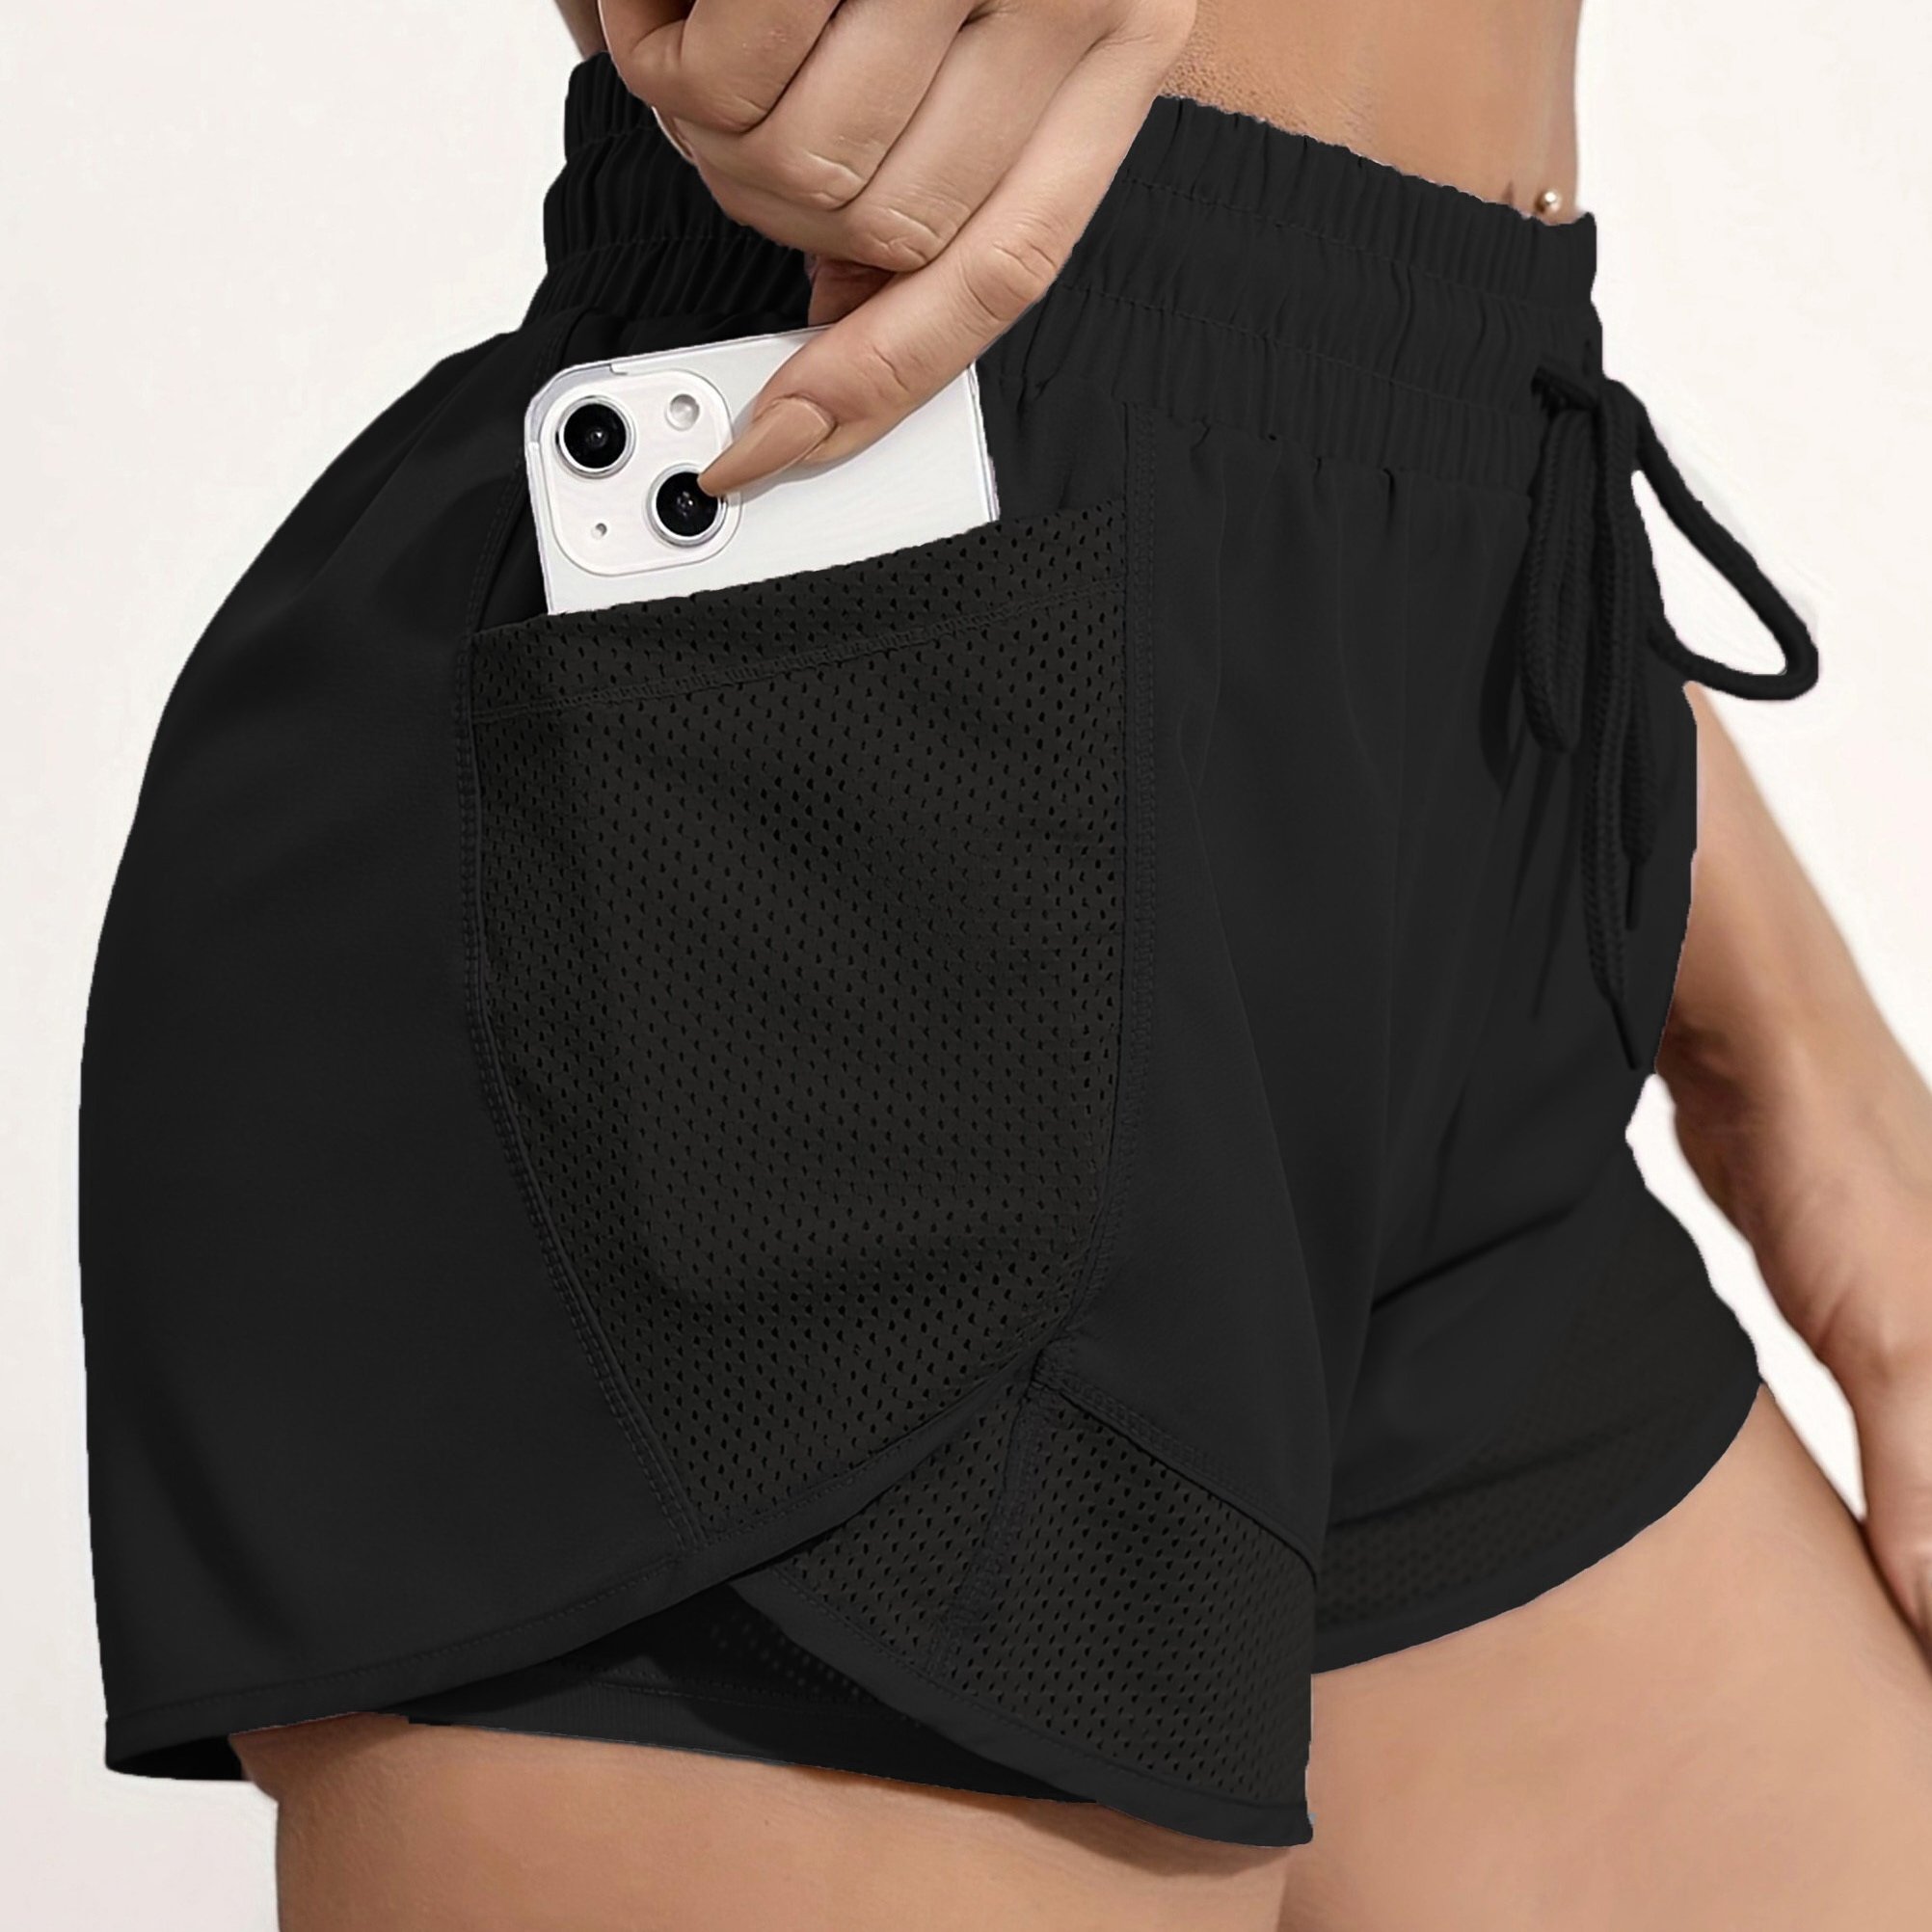 Womens Quick Drying Yoga Shorts With Pockets With Multi Pocket Fit And Sweat  Absorbing Fabric For Fitness, Running, And Jogging From Apparel8296, $11.98